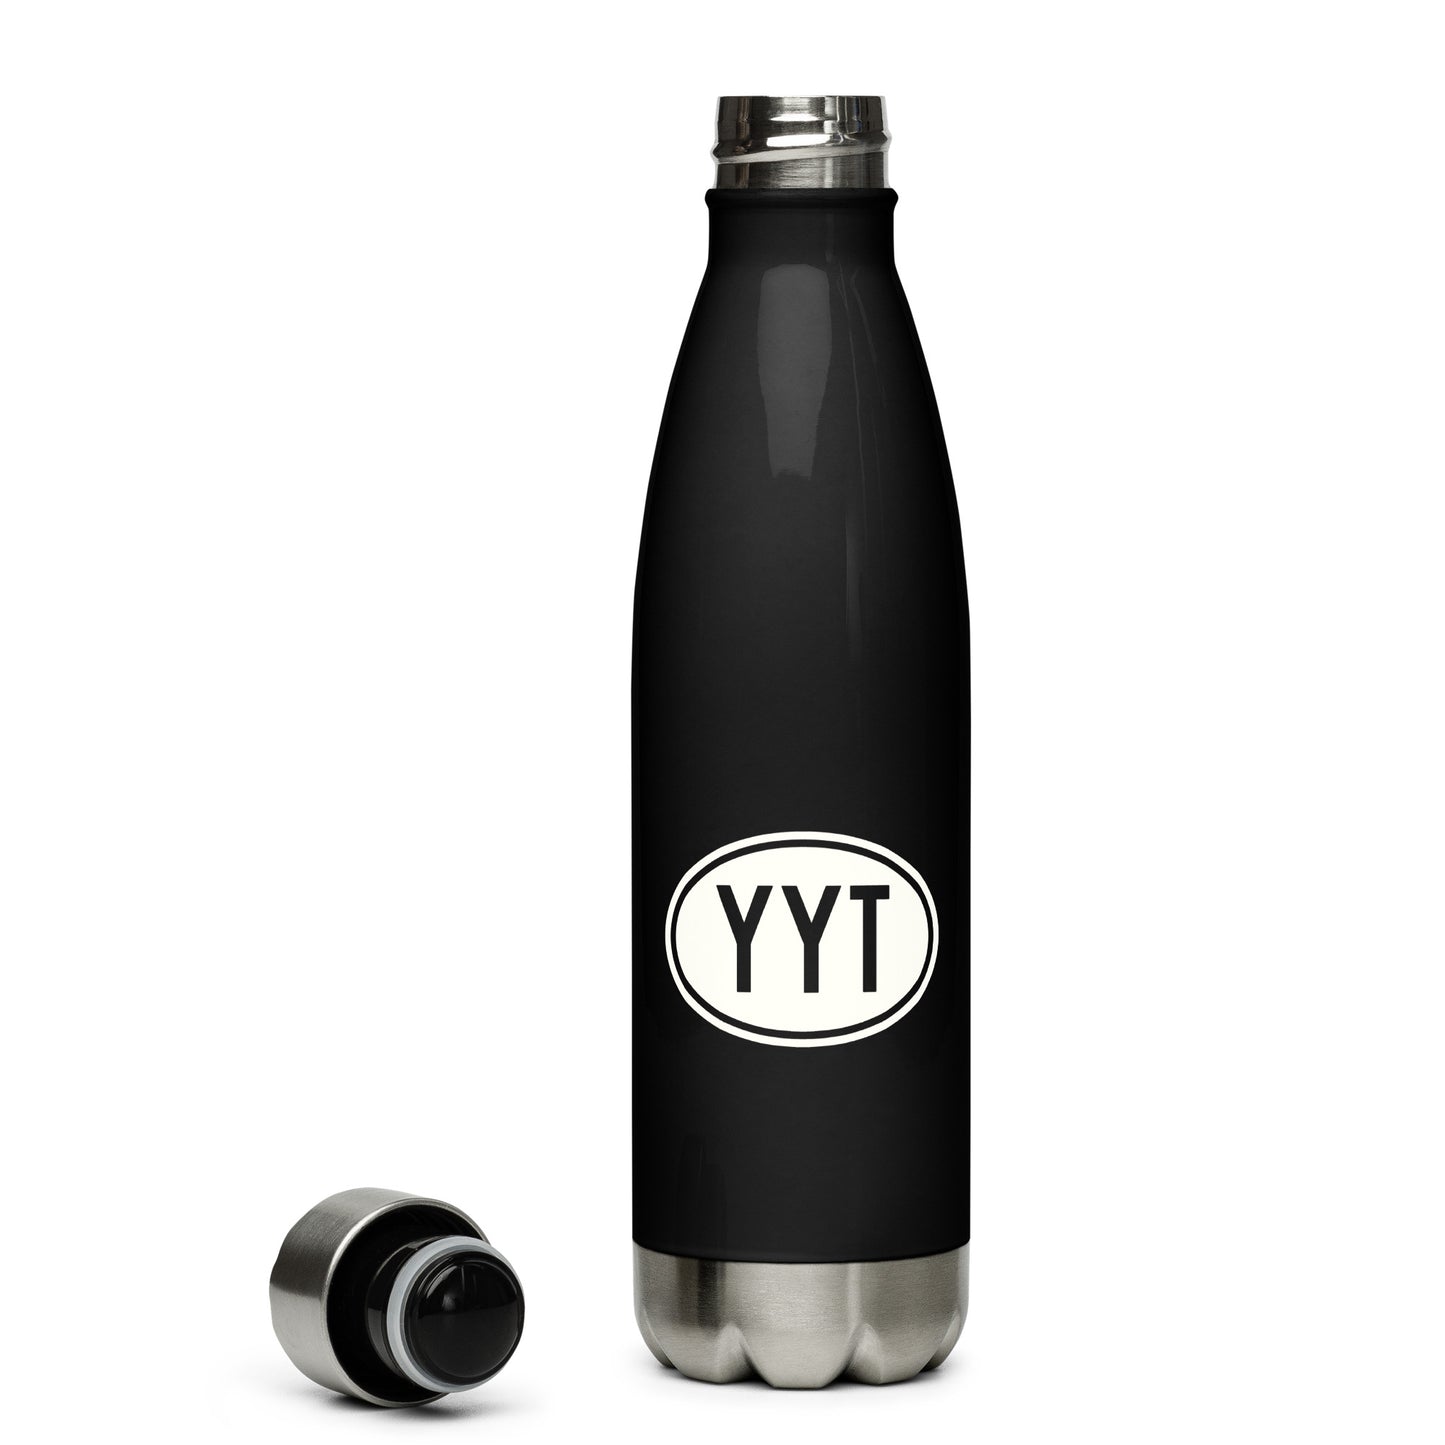 Unique Travel Gift Water Bottle - White Oval • YYT St. John's • YHM Designs - Image 04